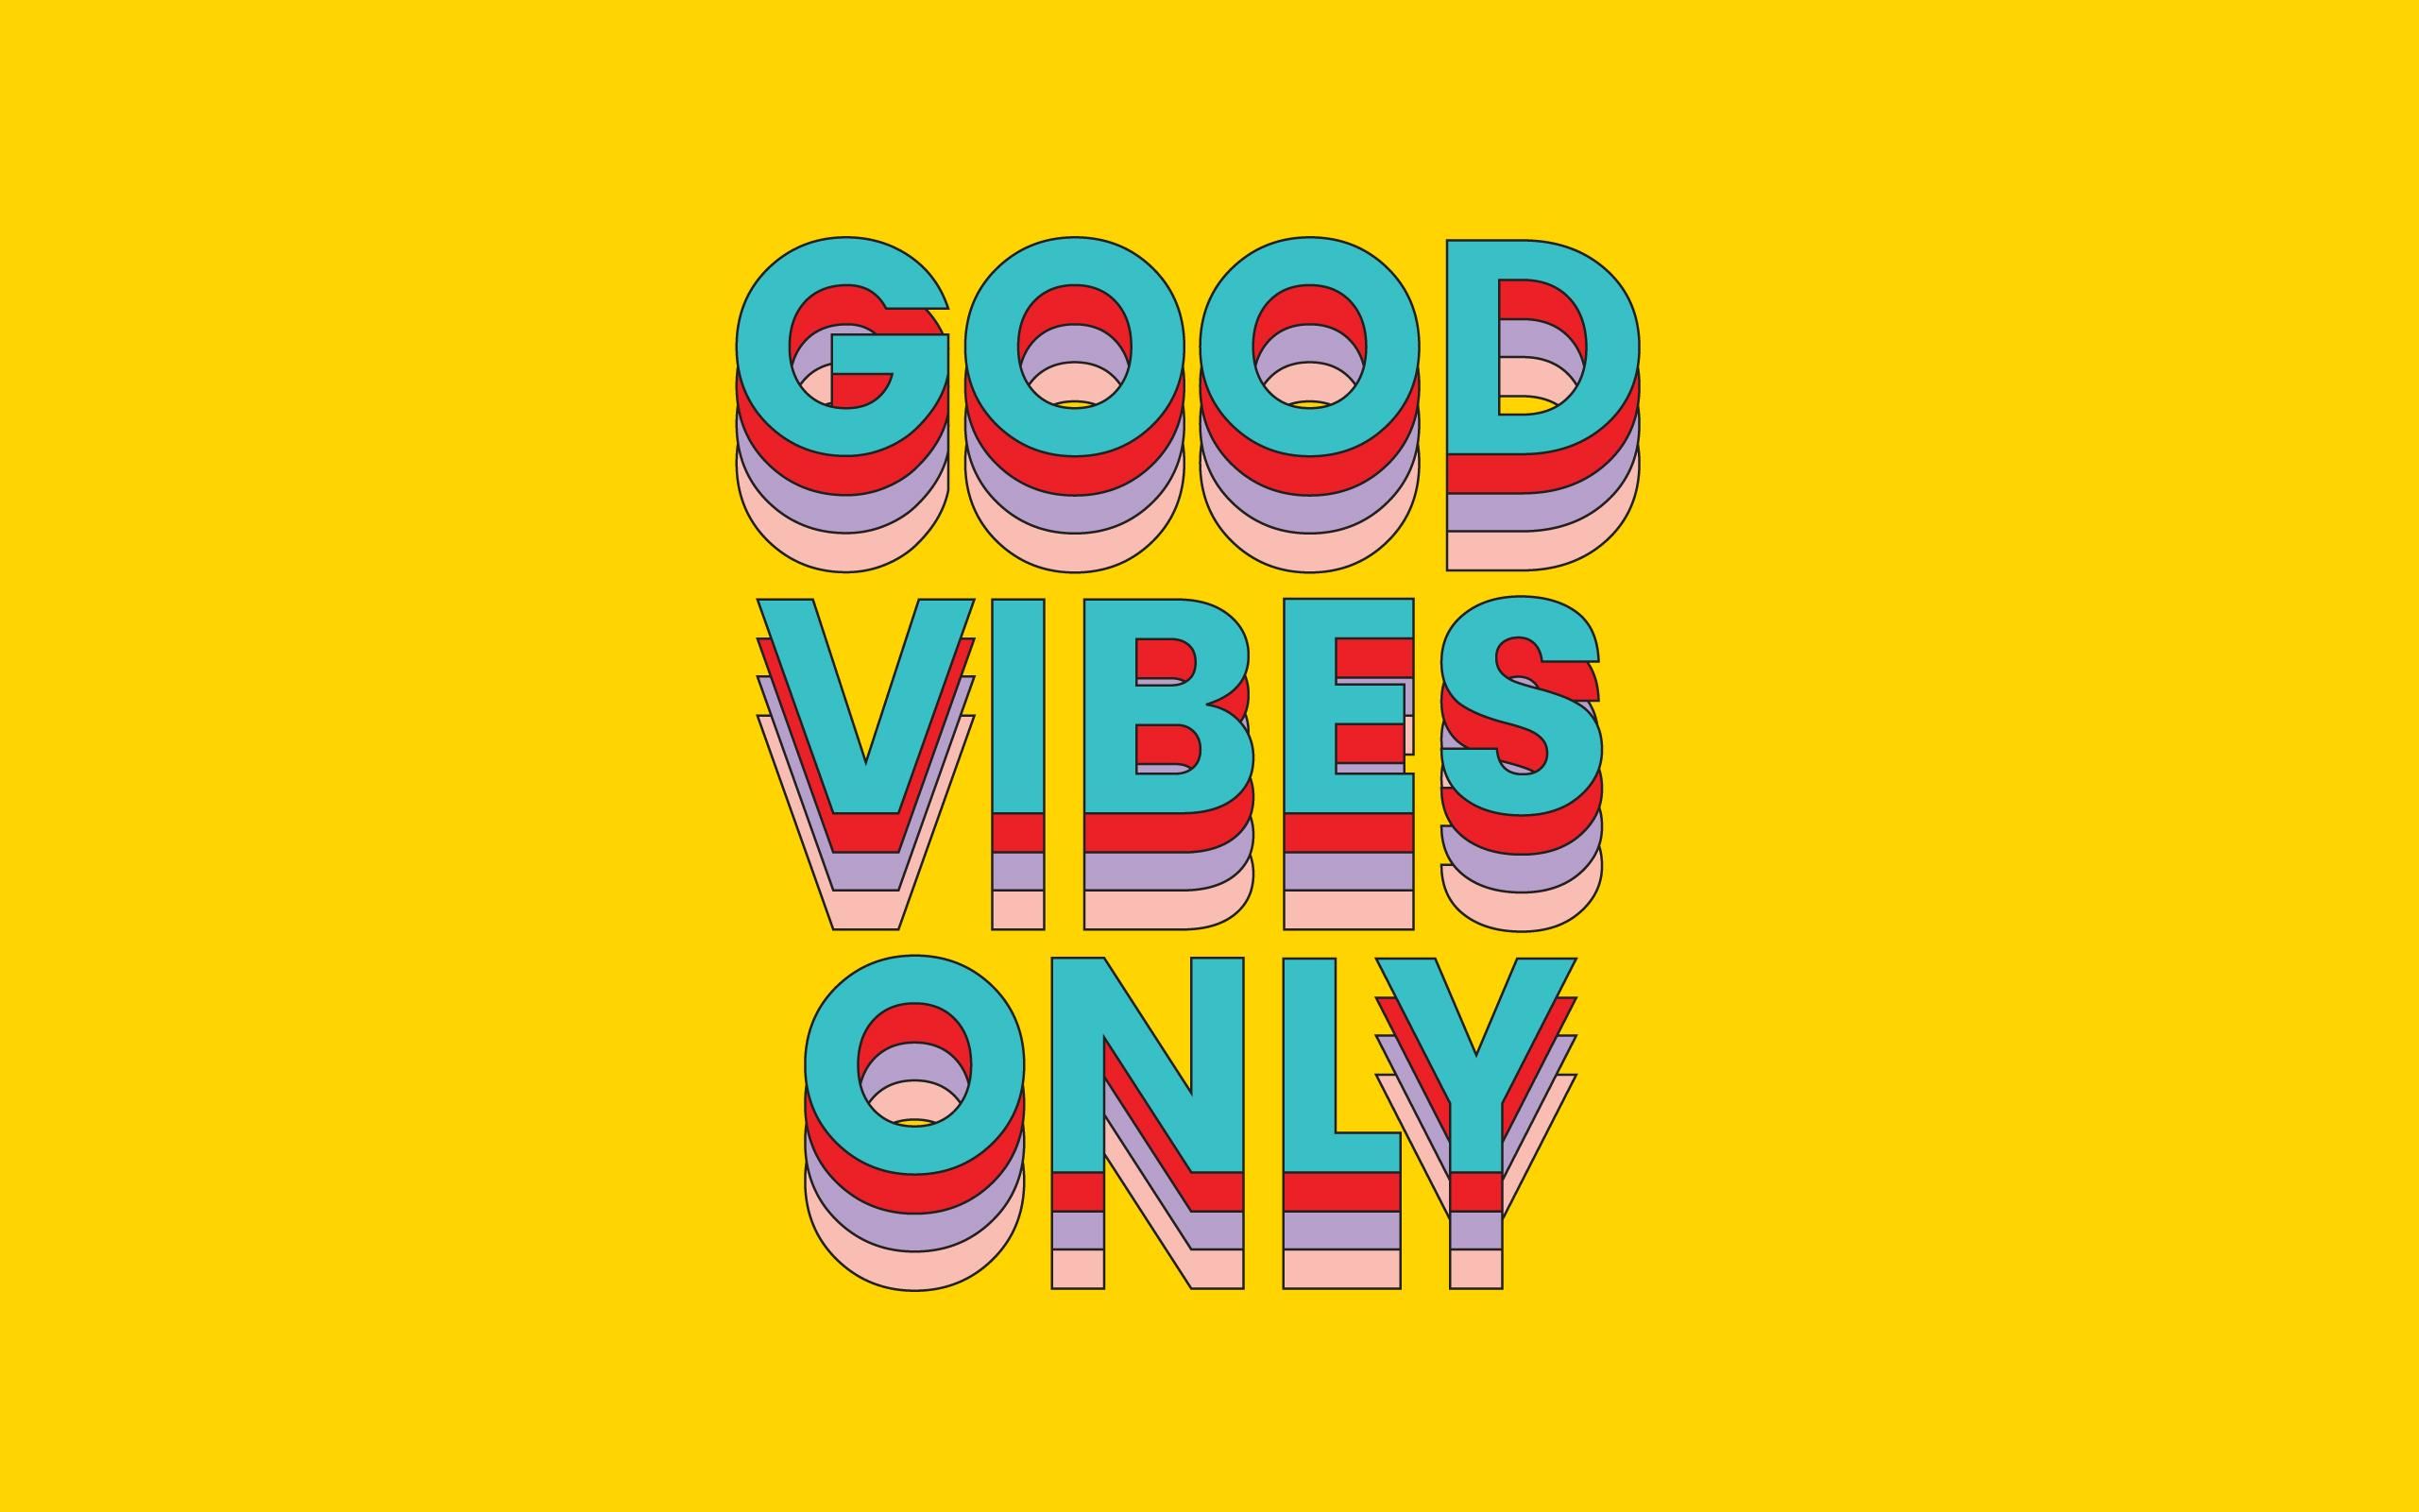 500 Good Vibes Only Pictures HD  Download Free Images on Unsplash